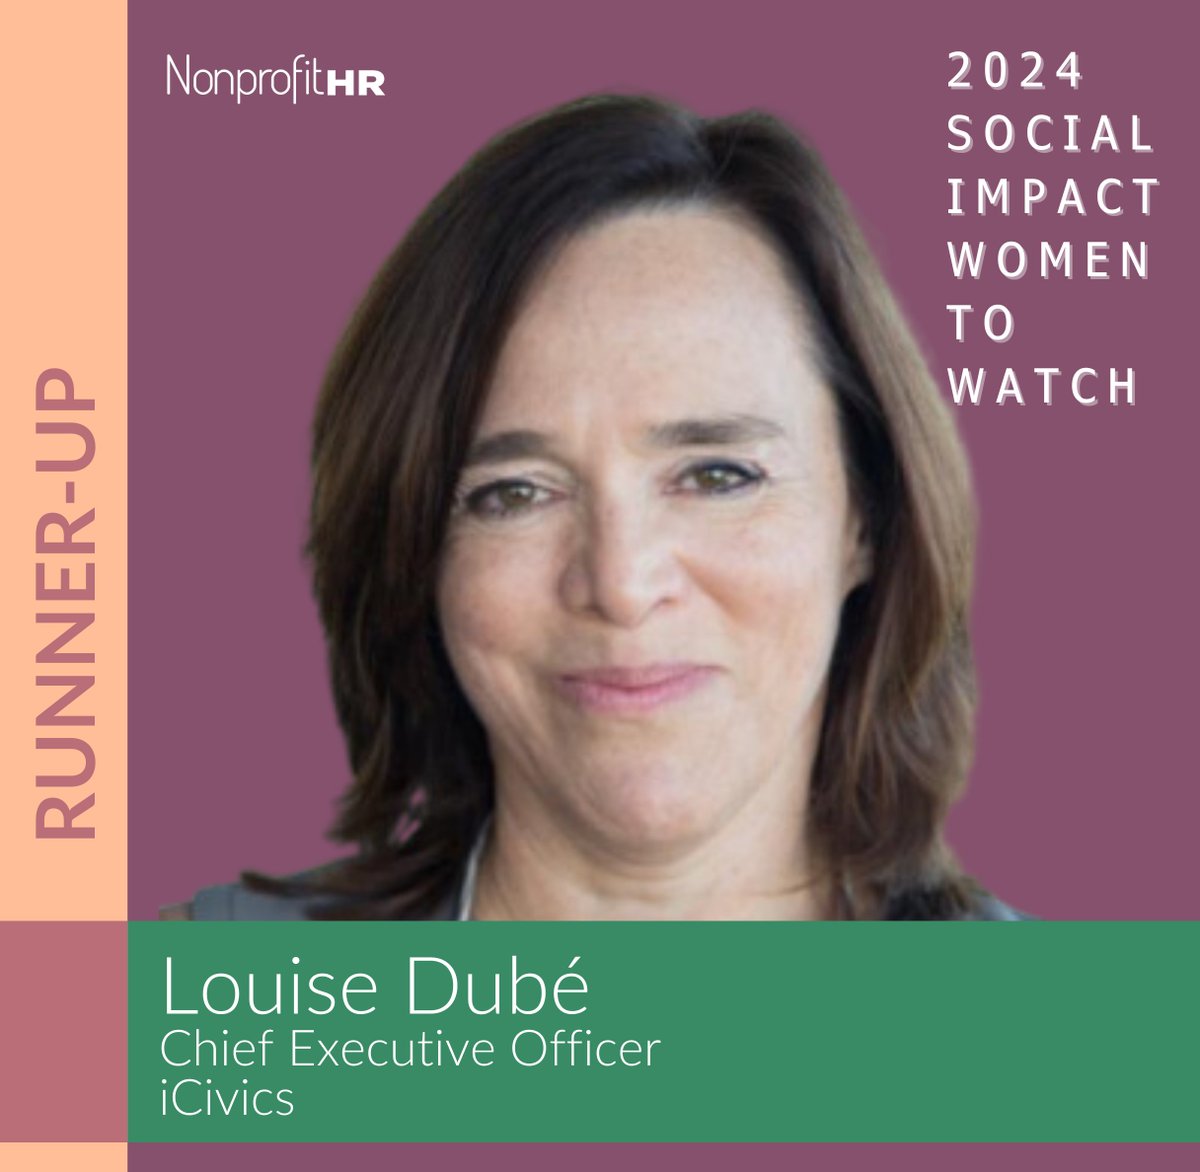 Runner-Up Spotlight Series: Meet Louise Dubé, CEO of @icivics since 2014. Learn more about Louise and all the extraordinary runners-up named to this year's Social Impact Women to Watch List: nonprofithr.com/2024-social-im… 
#NonprofitHR #2024W2W